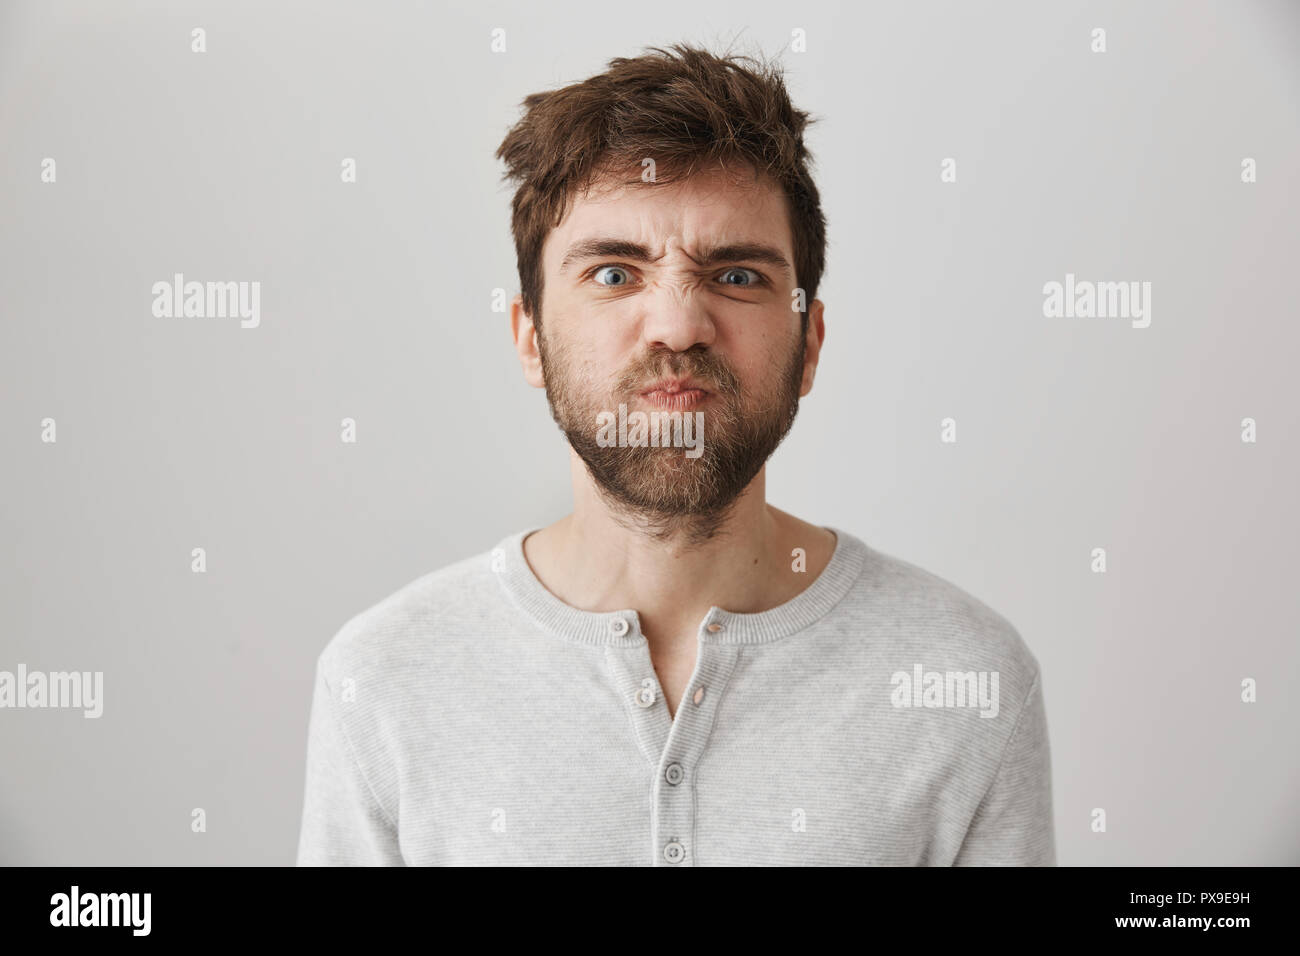 Portrait of funny weird guy with messy hair and beard making faces, puckering eyebrows and sulking, standing over gray background with offended or irritated expression, losing his temper Stock Photo